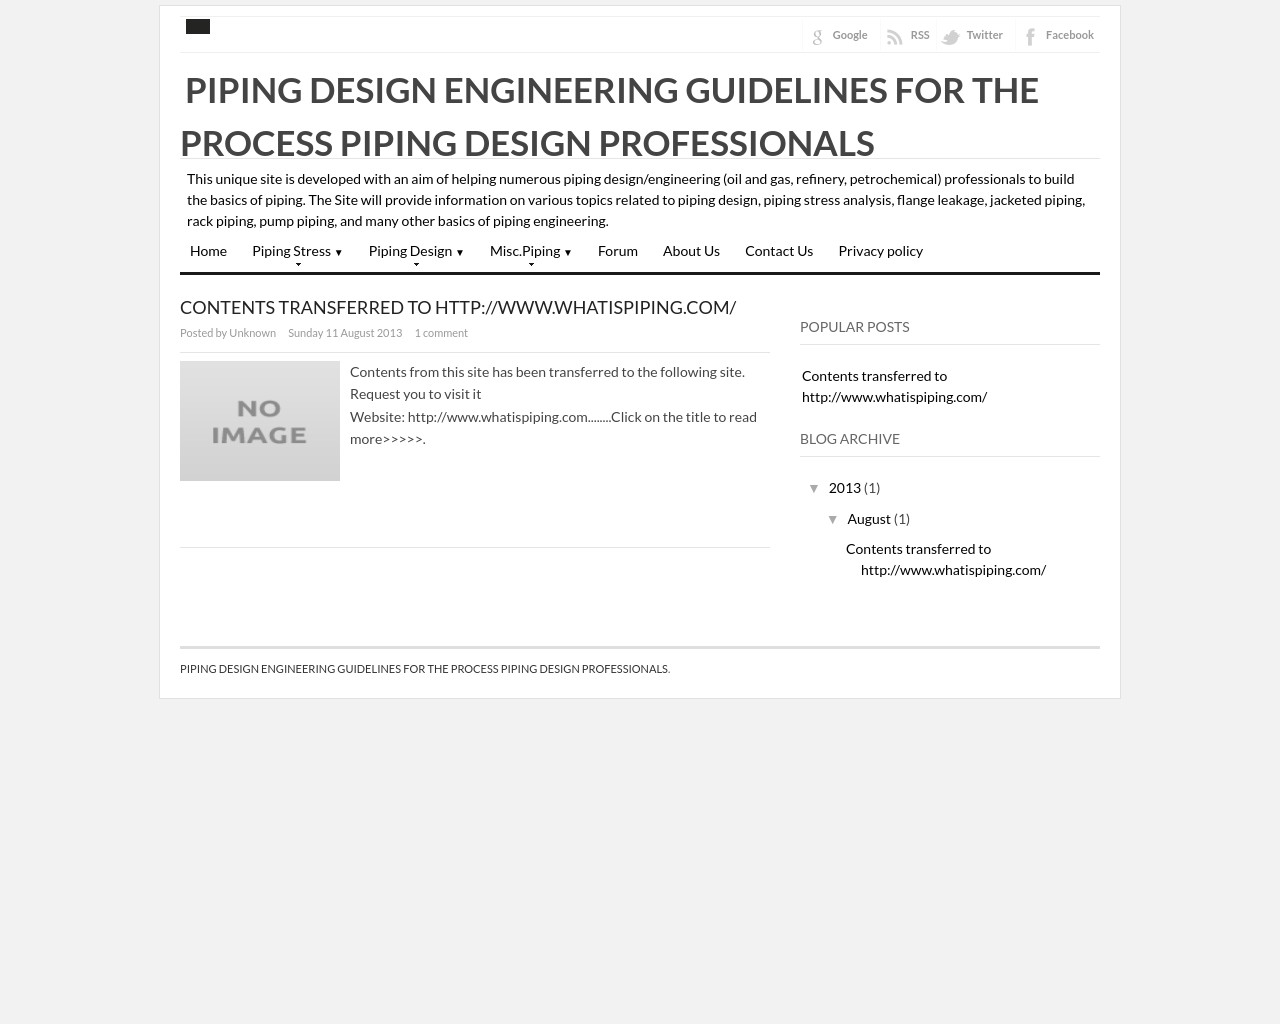 PIPING DESIGN ENGINEERING GUIDELINES FOR THE PROCESS PIPING DESIGN PROFESSIONALS